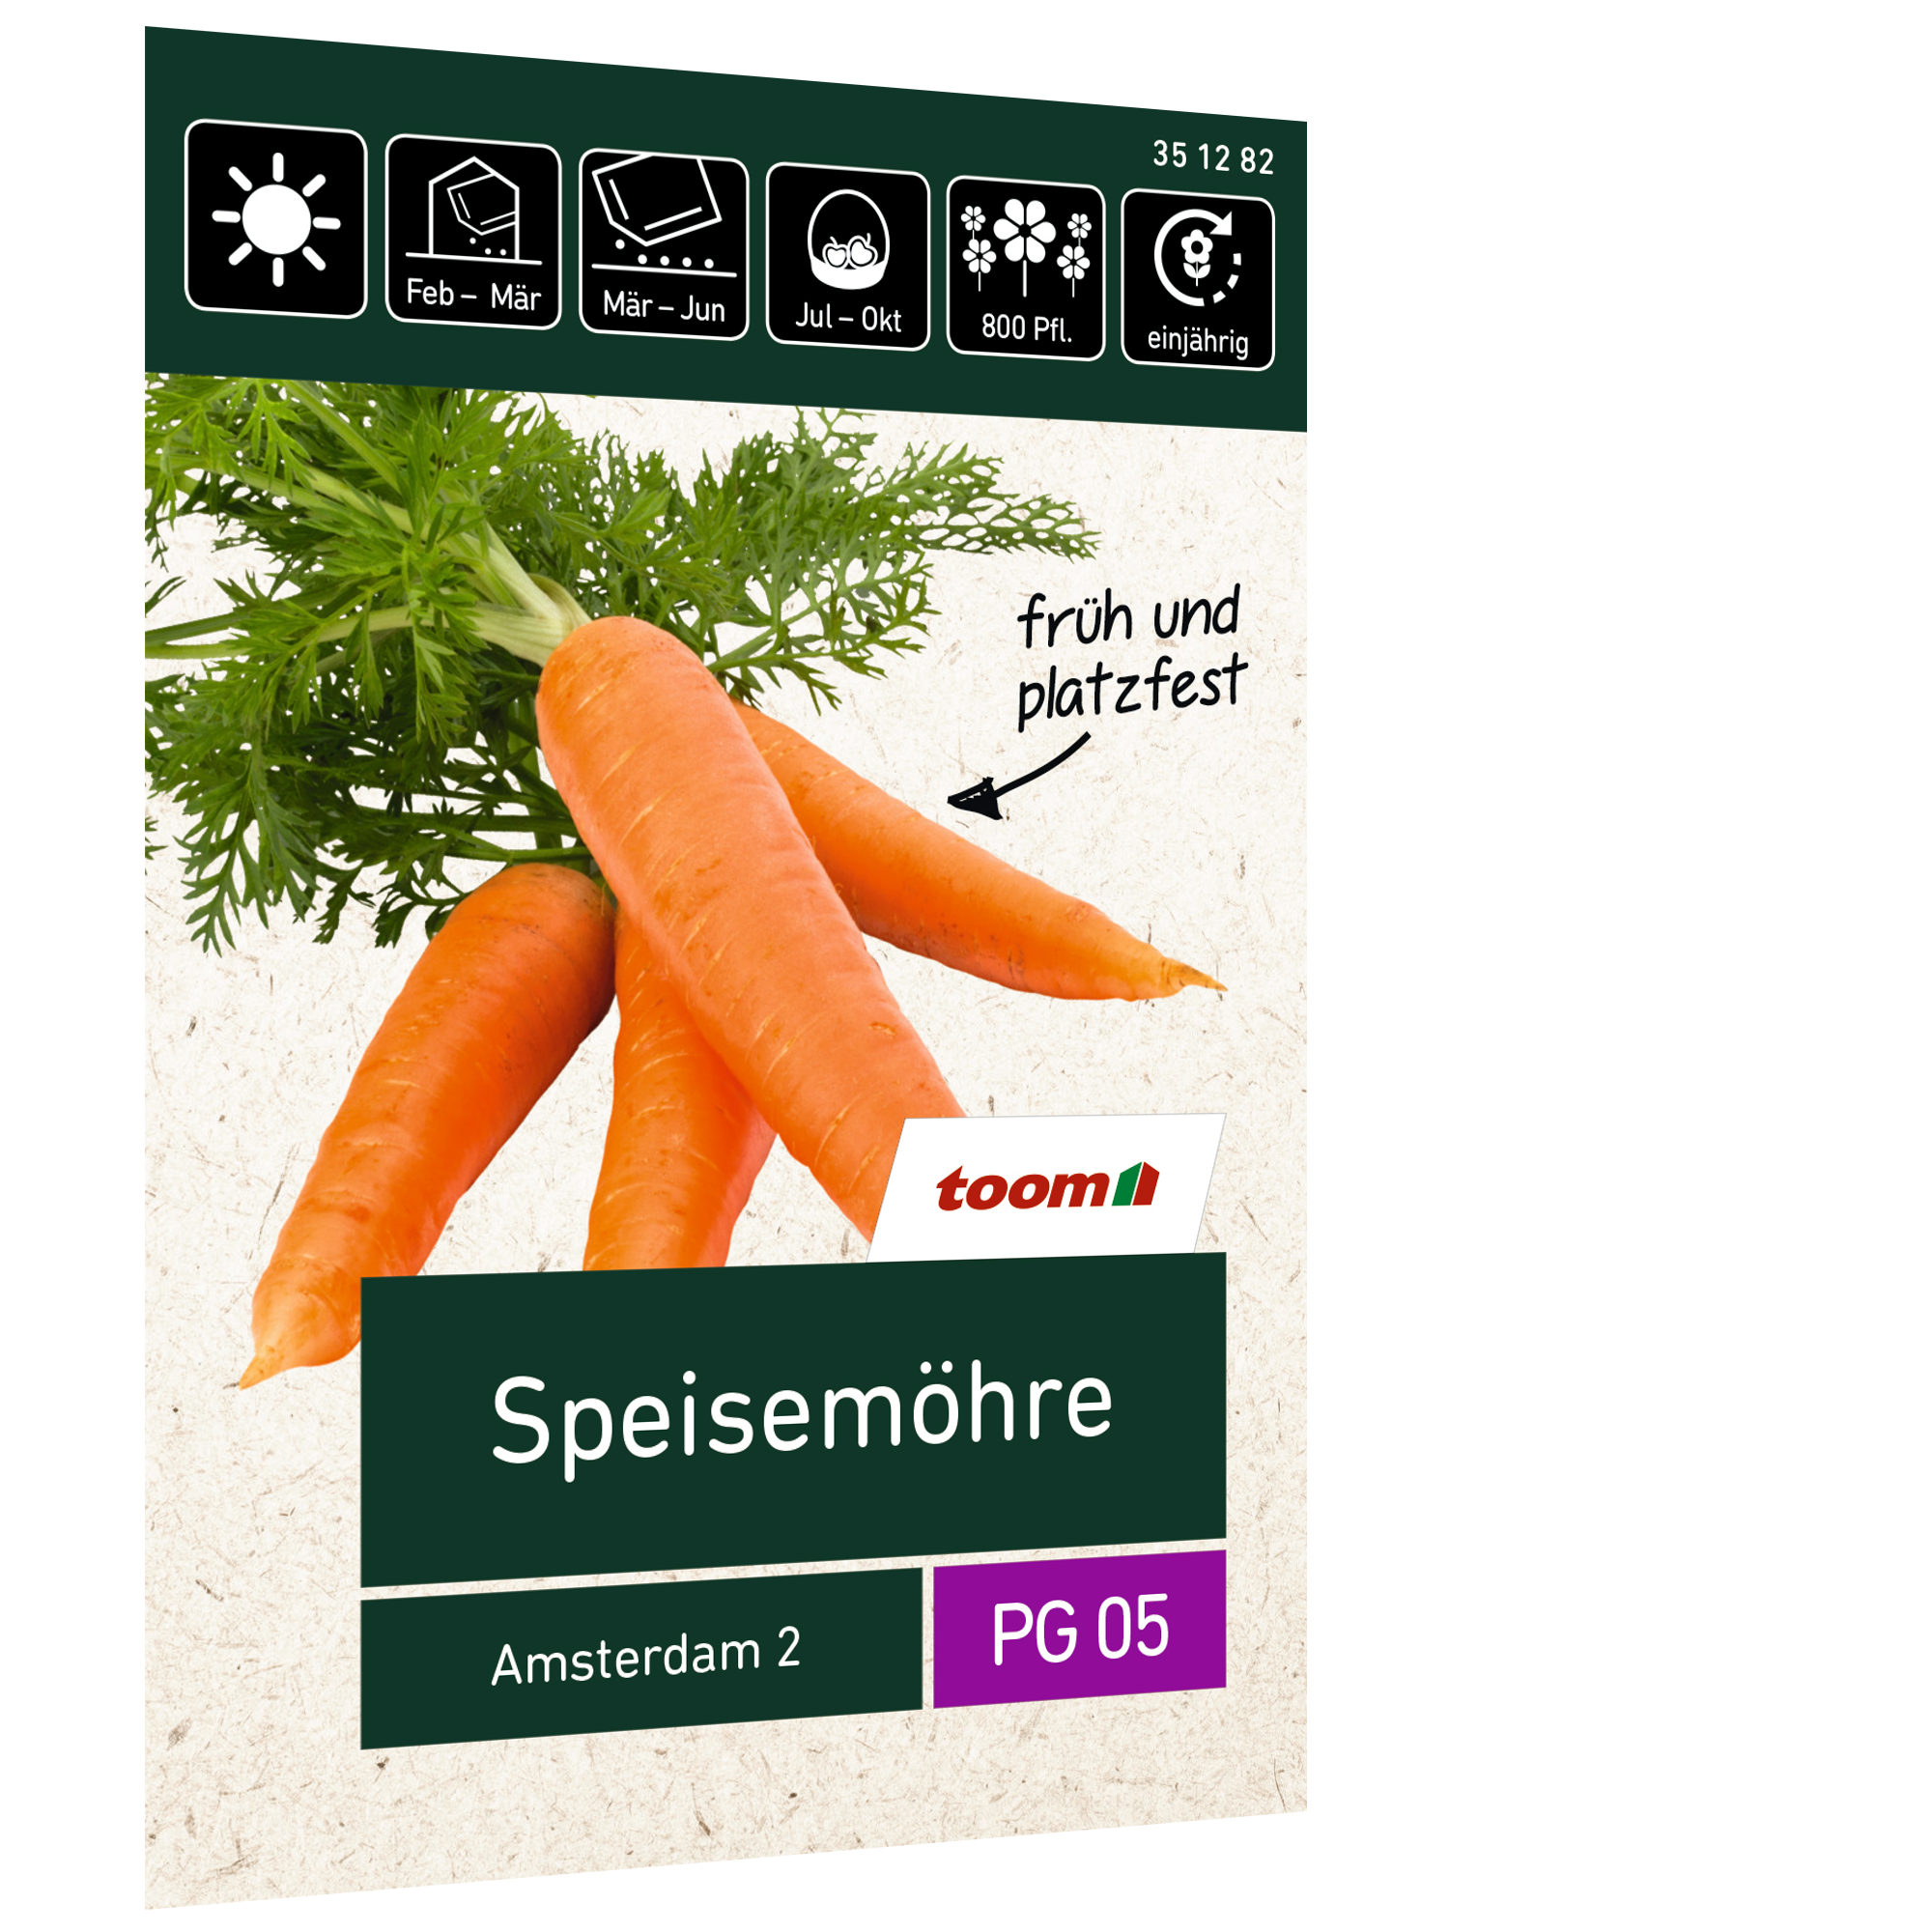 Speisemöhre 'Amsterdam 2' + product picture